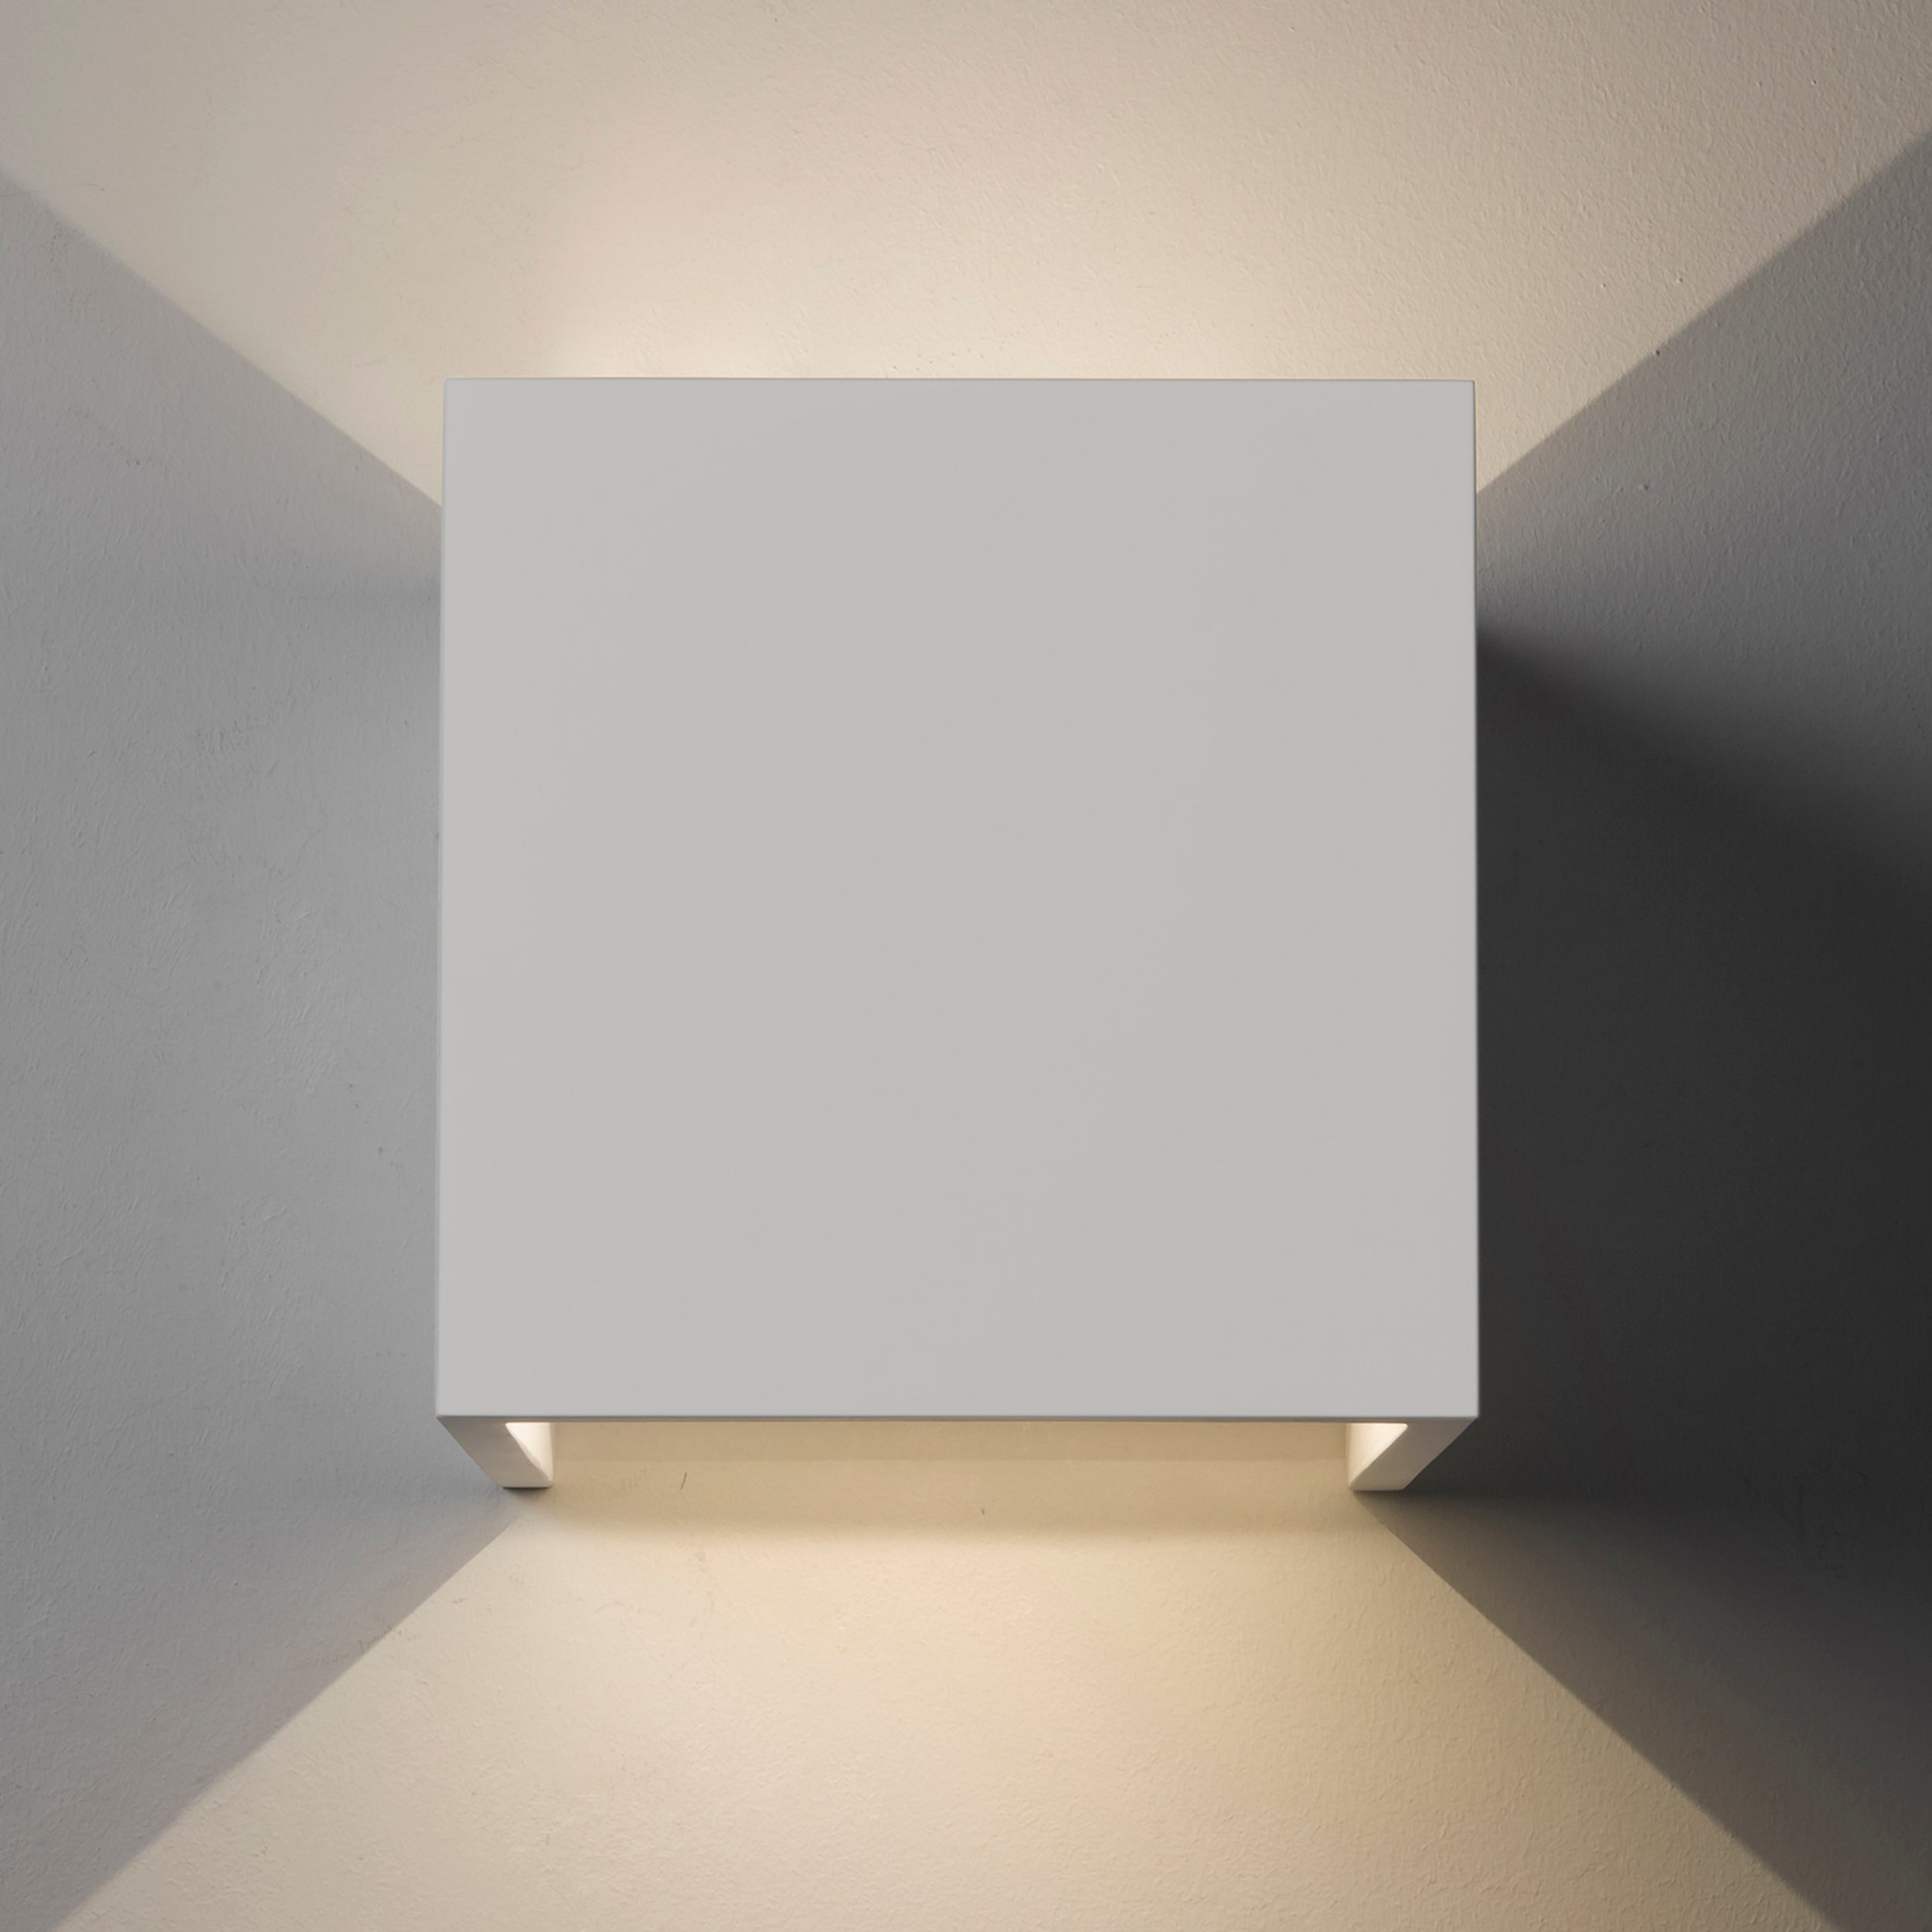 Astro Lighting Pienza LED Wall Light Fixtures Astro Lighting 5.51x5.51x5.51 Plaster Yes (Integral), High Power LED